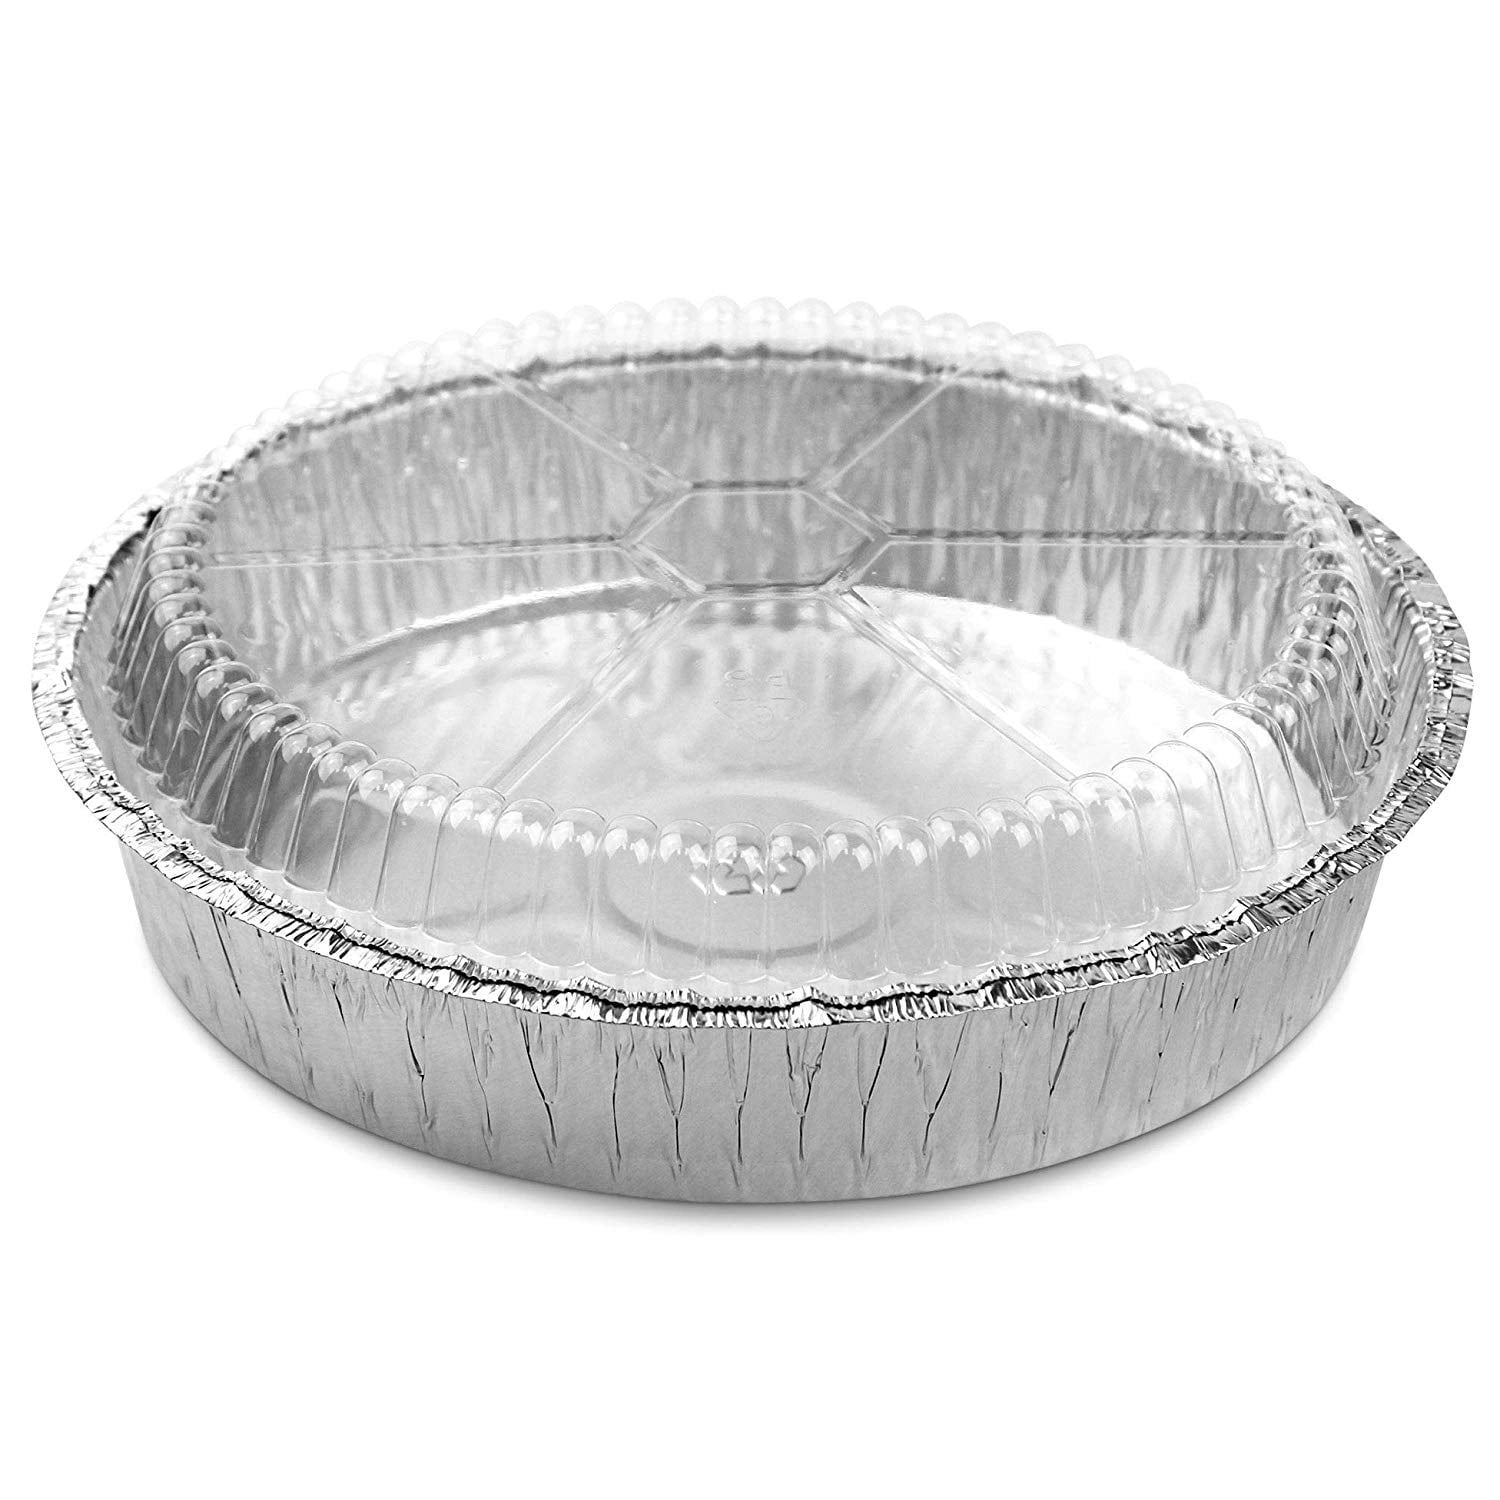 9 x 9 NO9 LARGE ALUMINIUM FOIL FOOD CONTAINERS WITH LIDS OVEN BAKING TAKE  AWAY